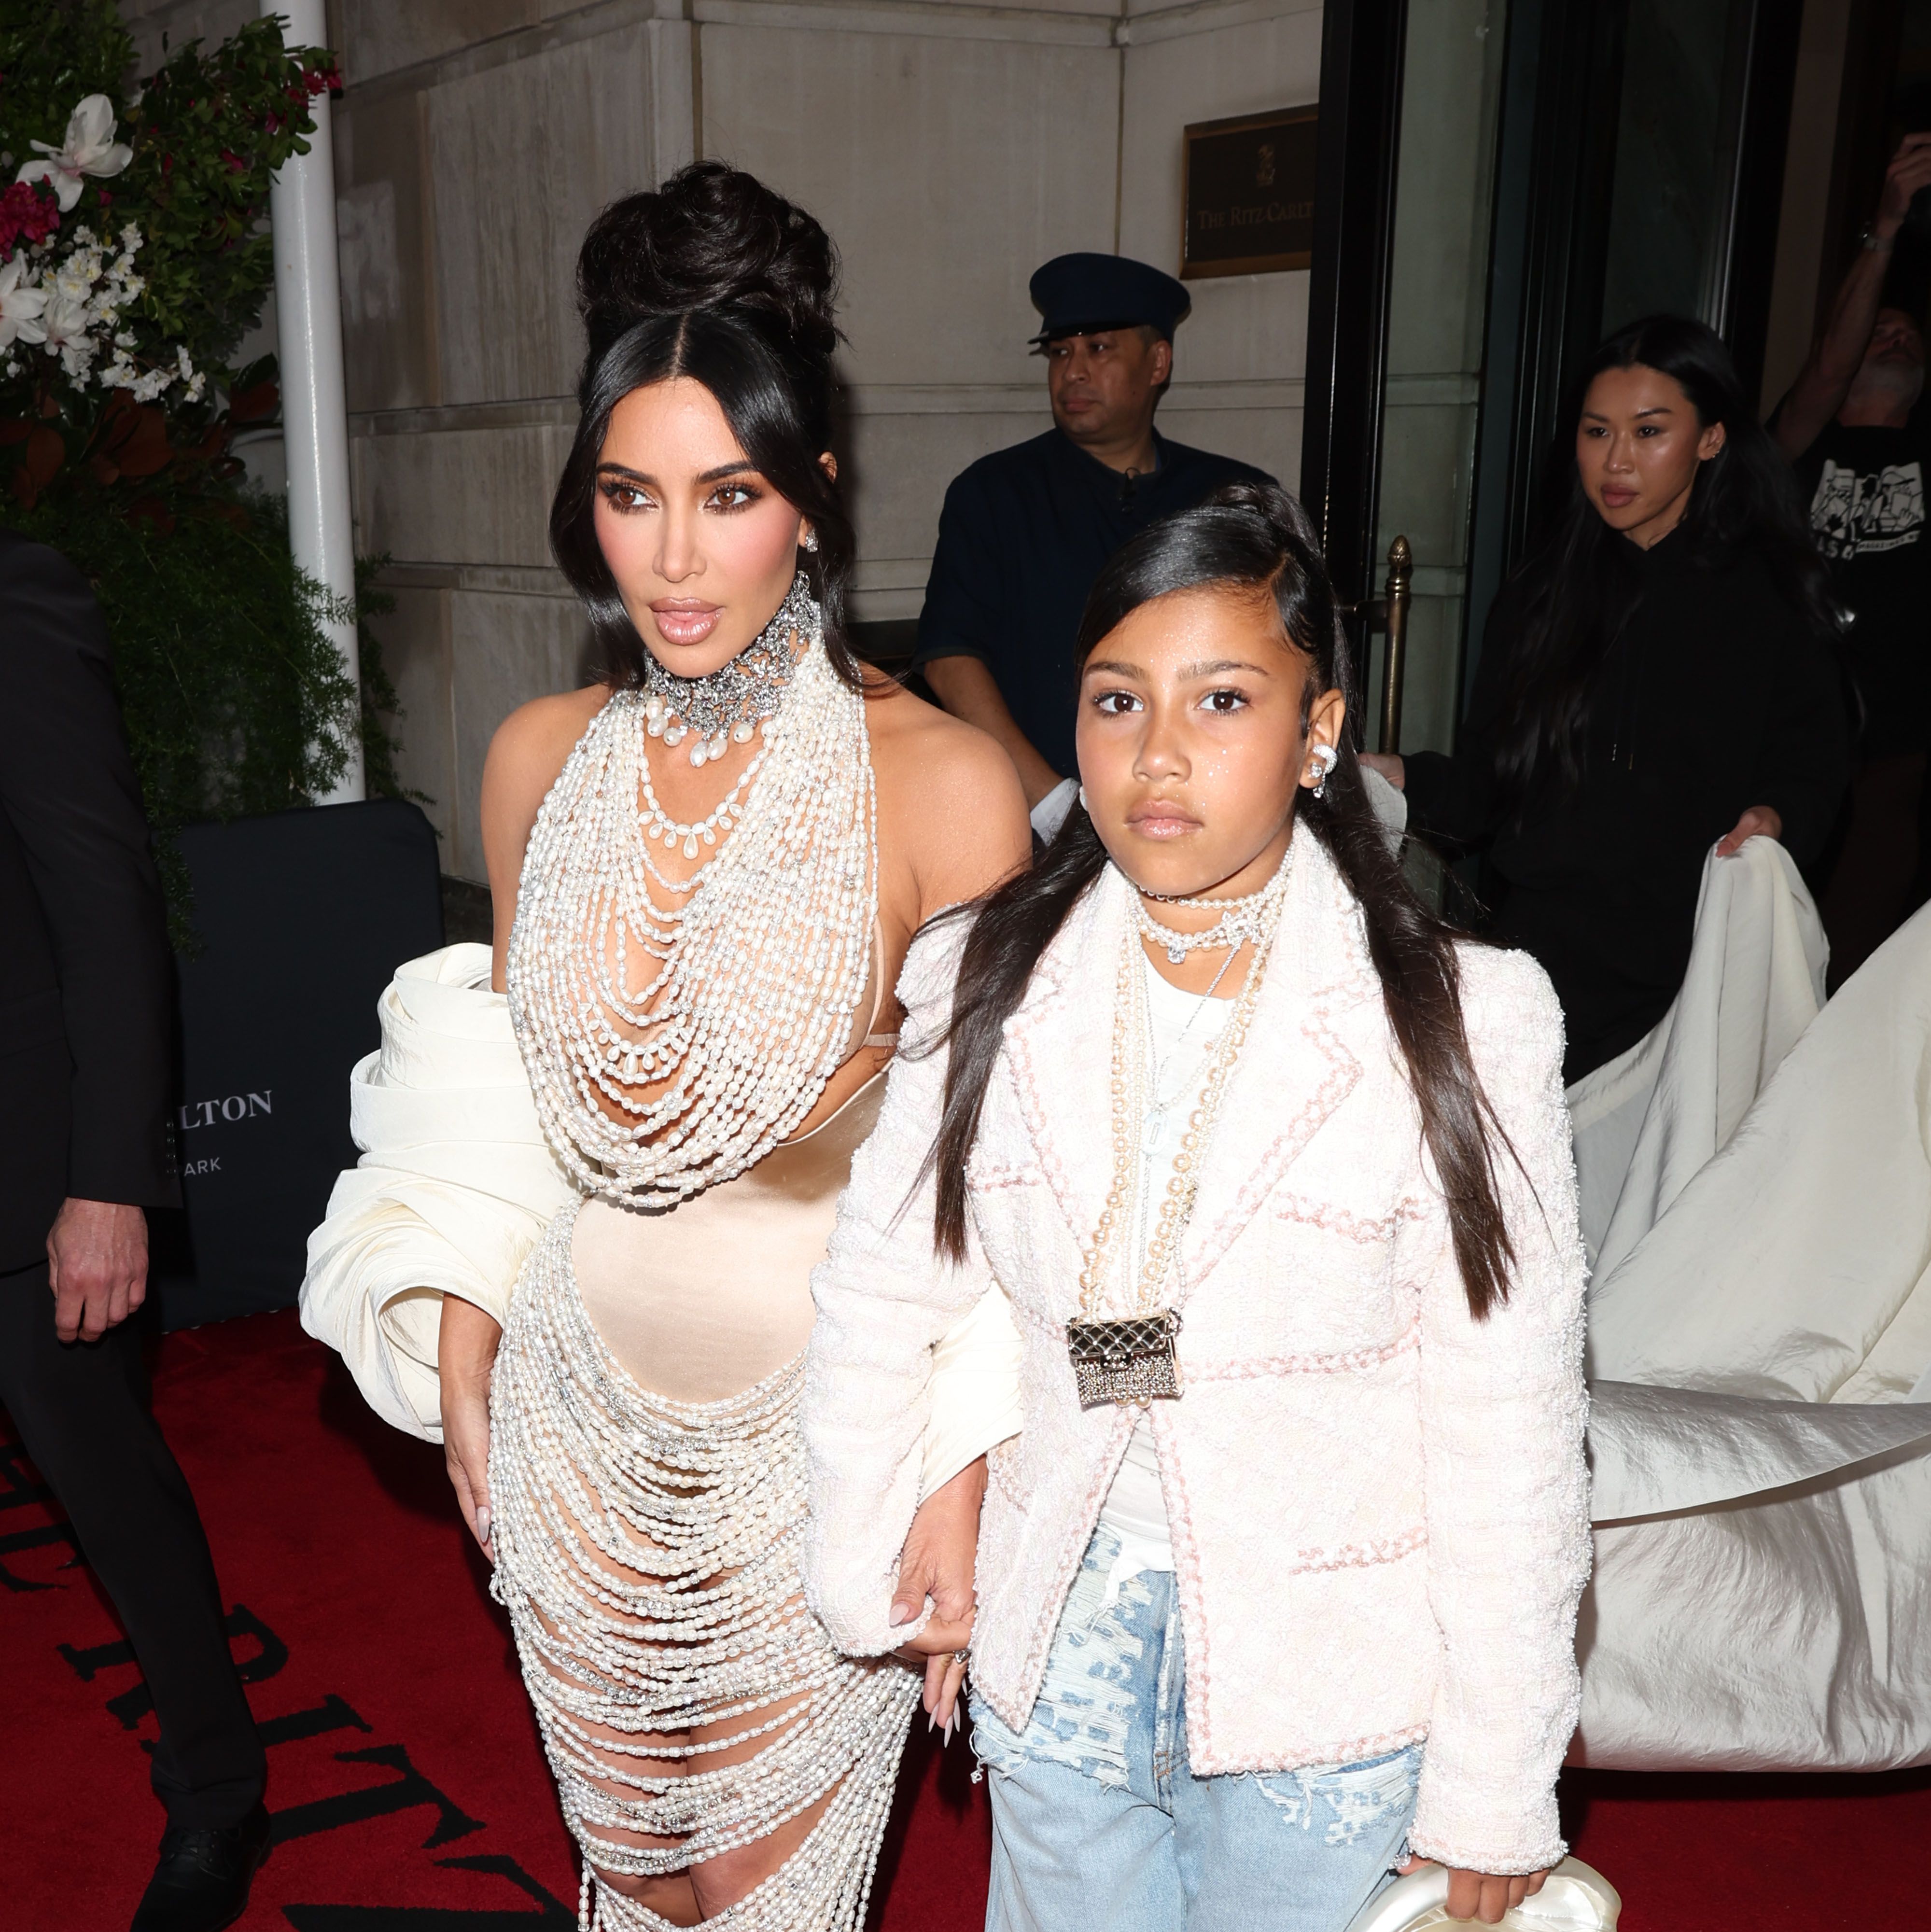 Kardashian and her daughter were photographed leaving their hotel together, but Kardashian went on to pose separately.